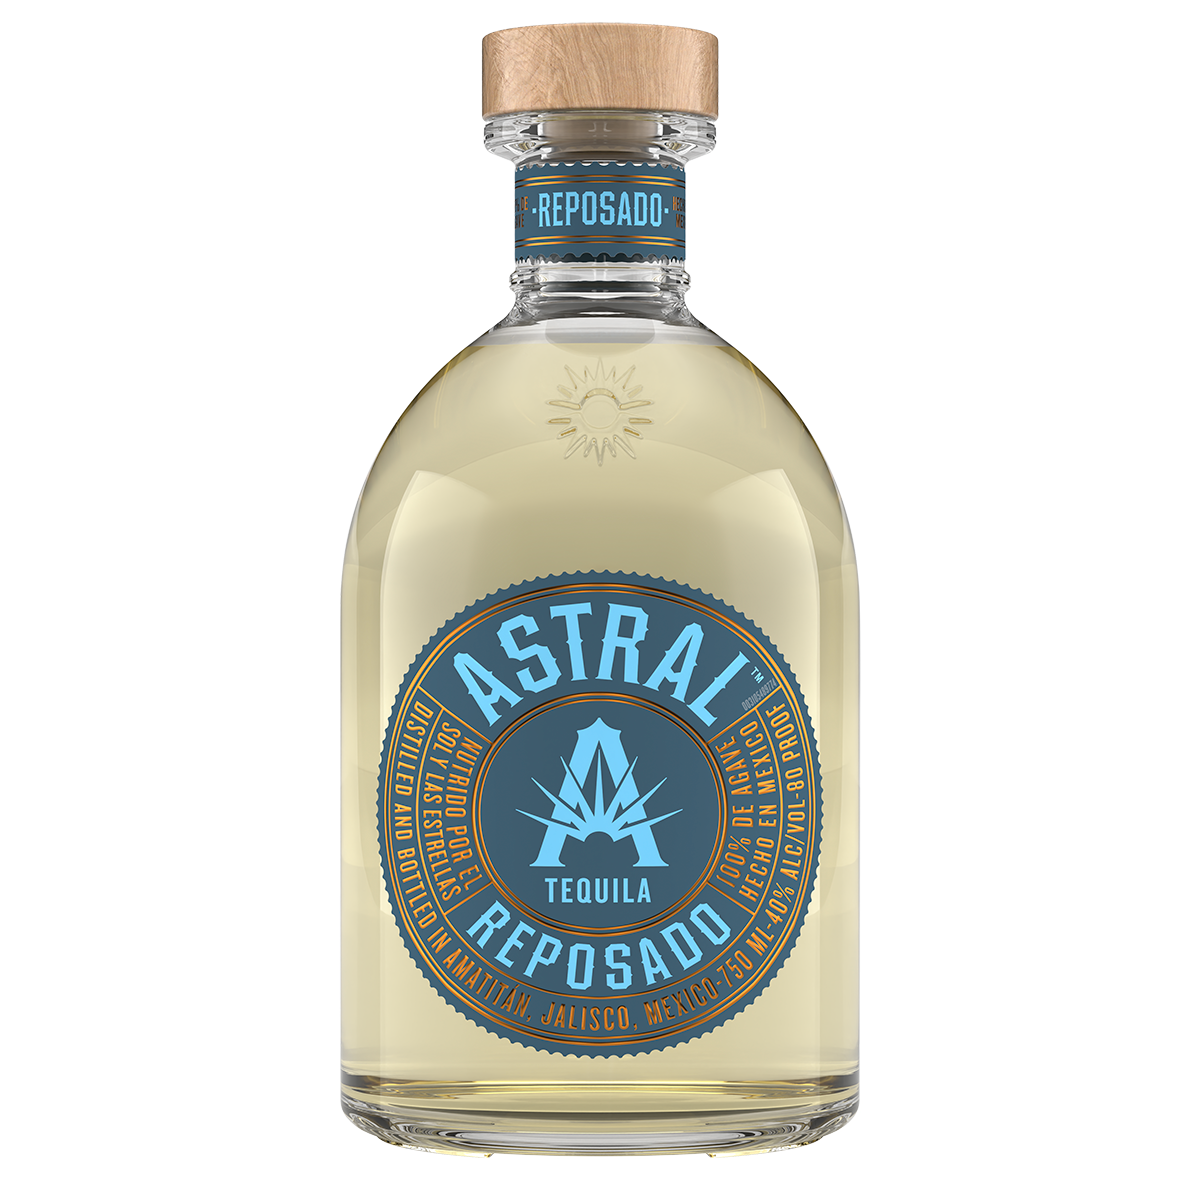 Bottle of Astral Tequila Reposado